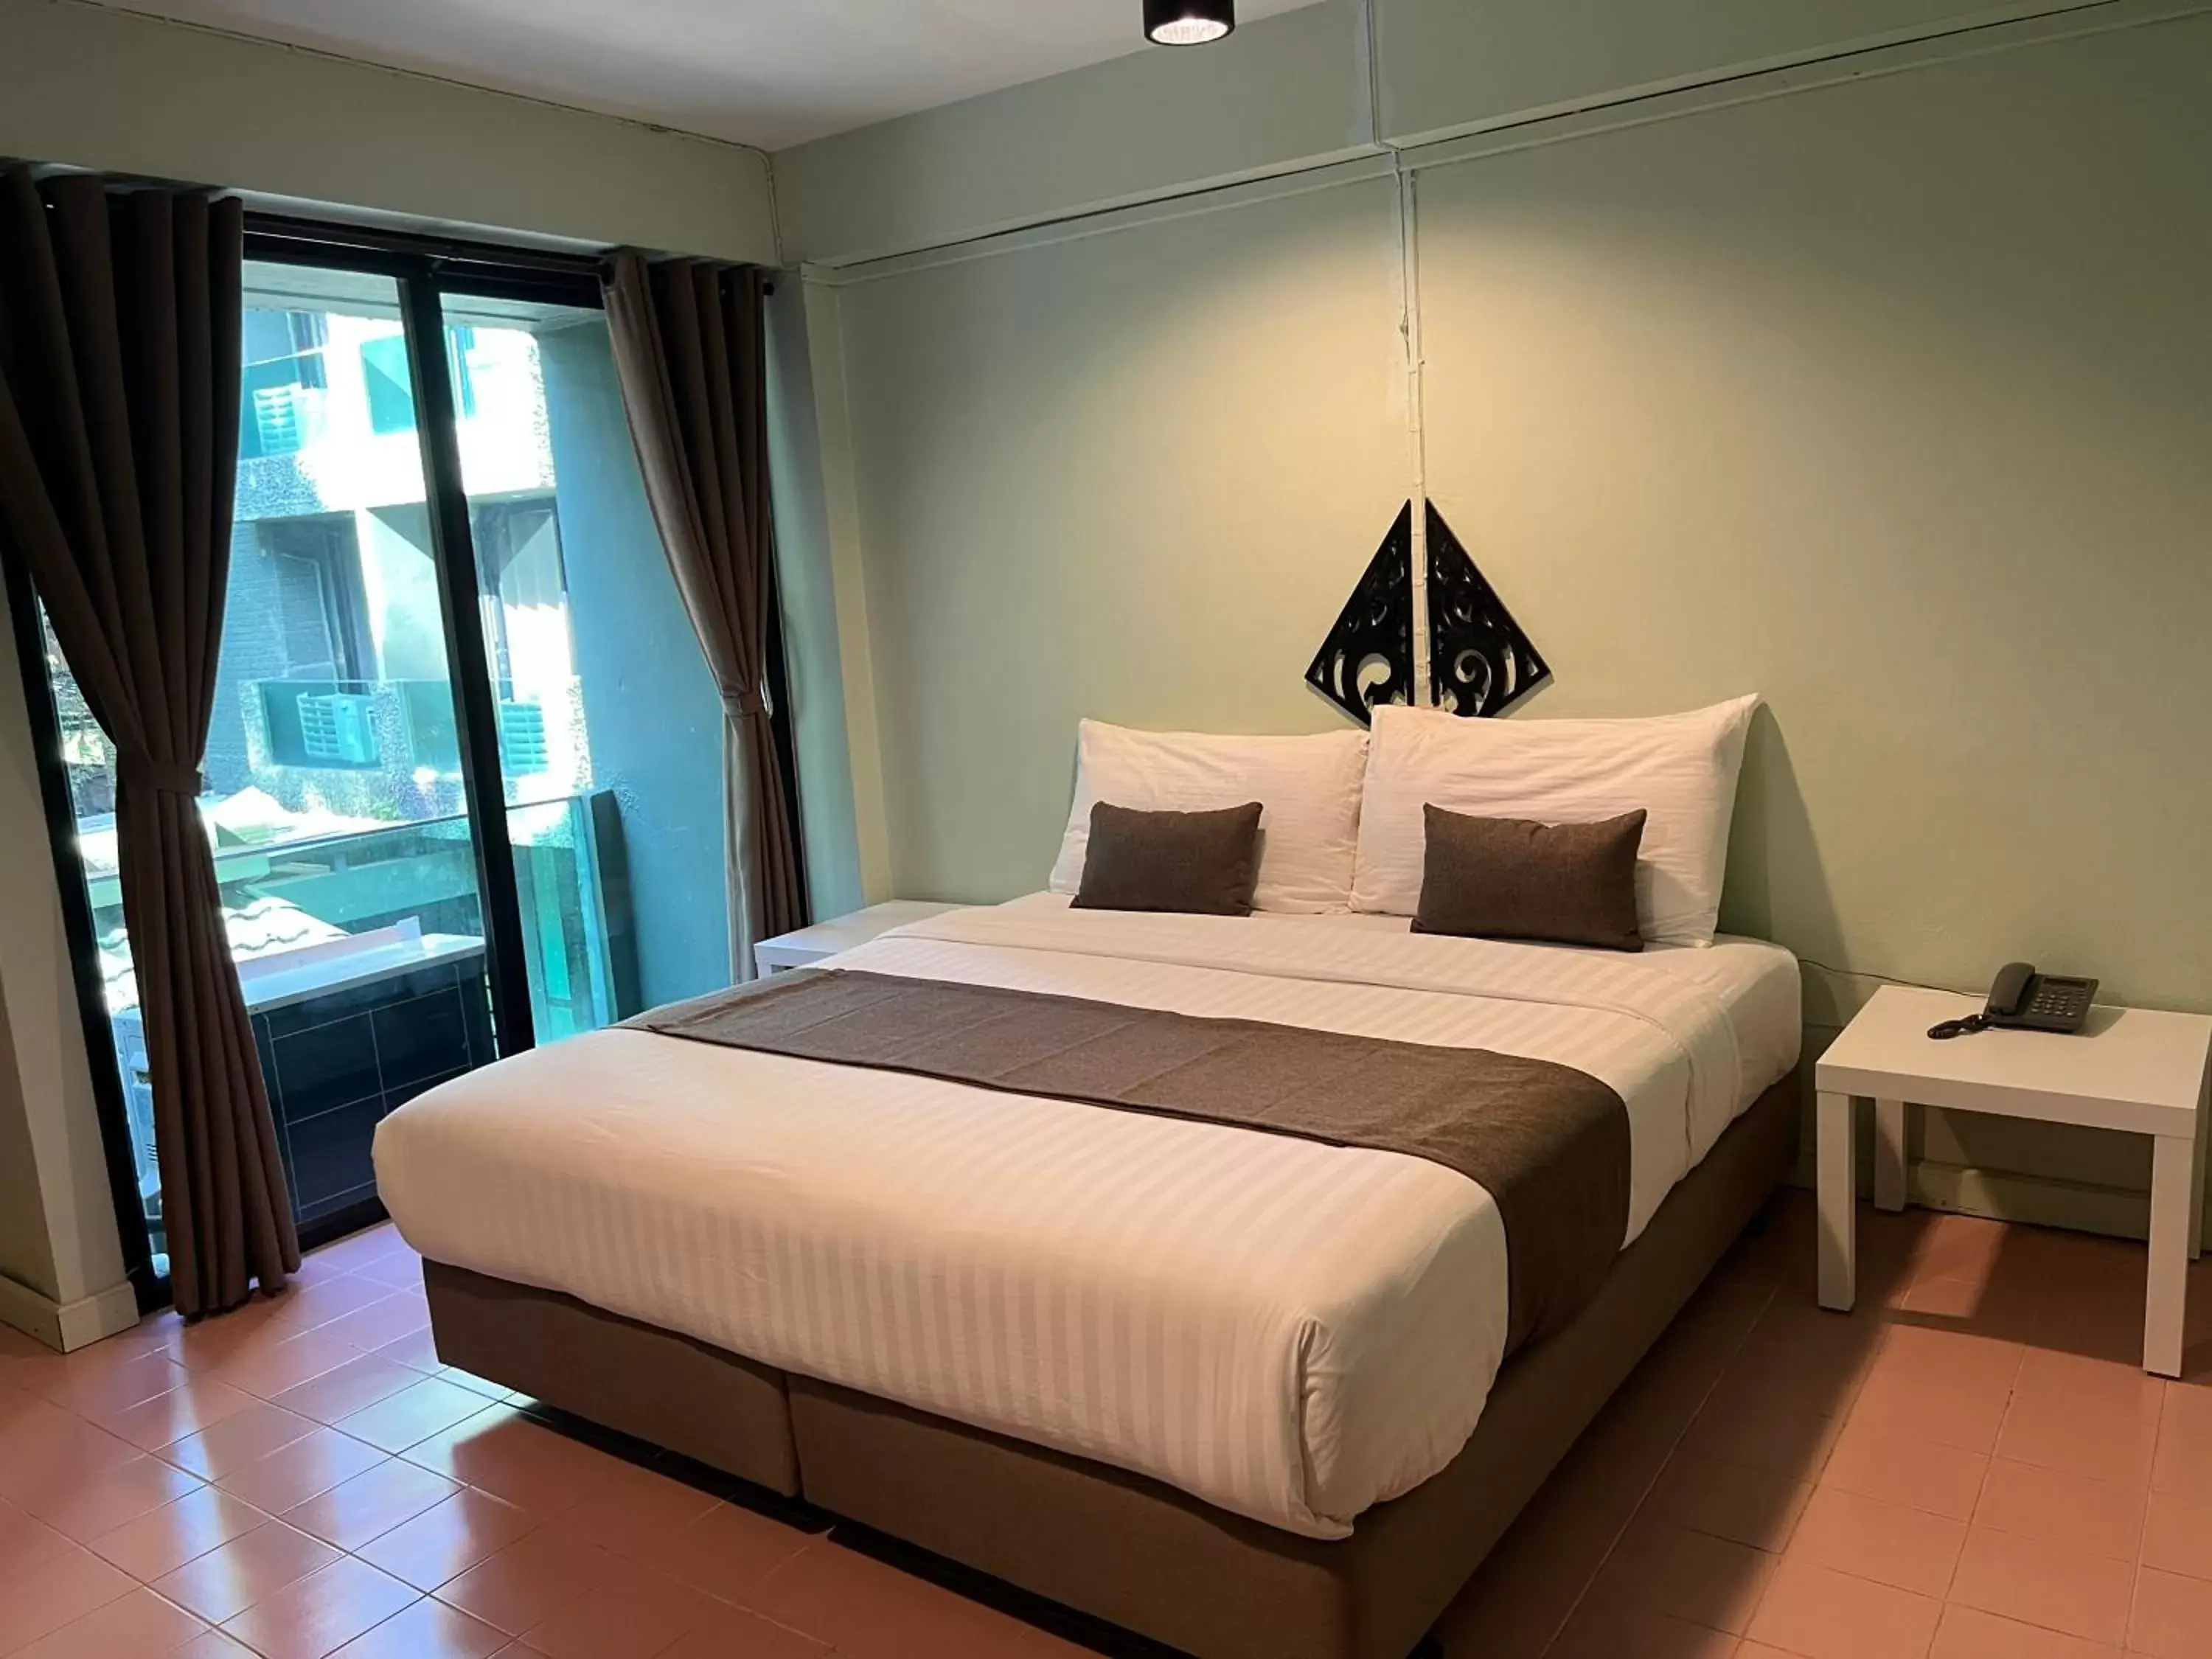 Property building, Bed in A Hotel Budget